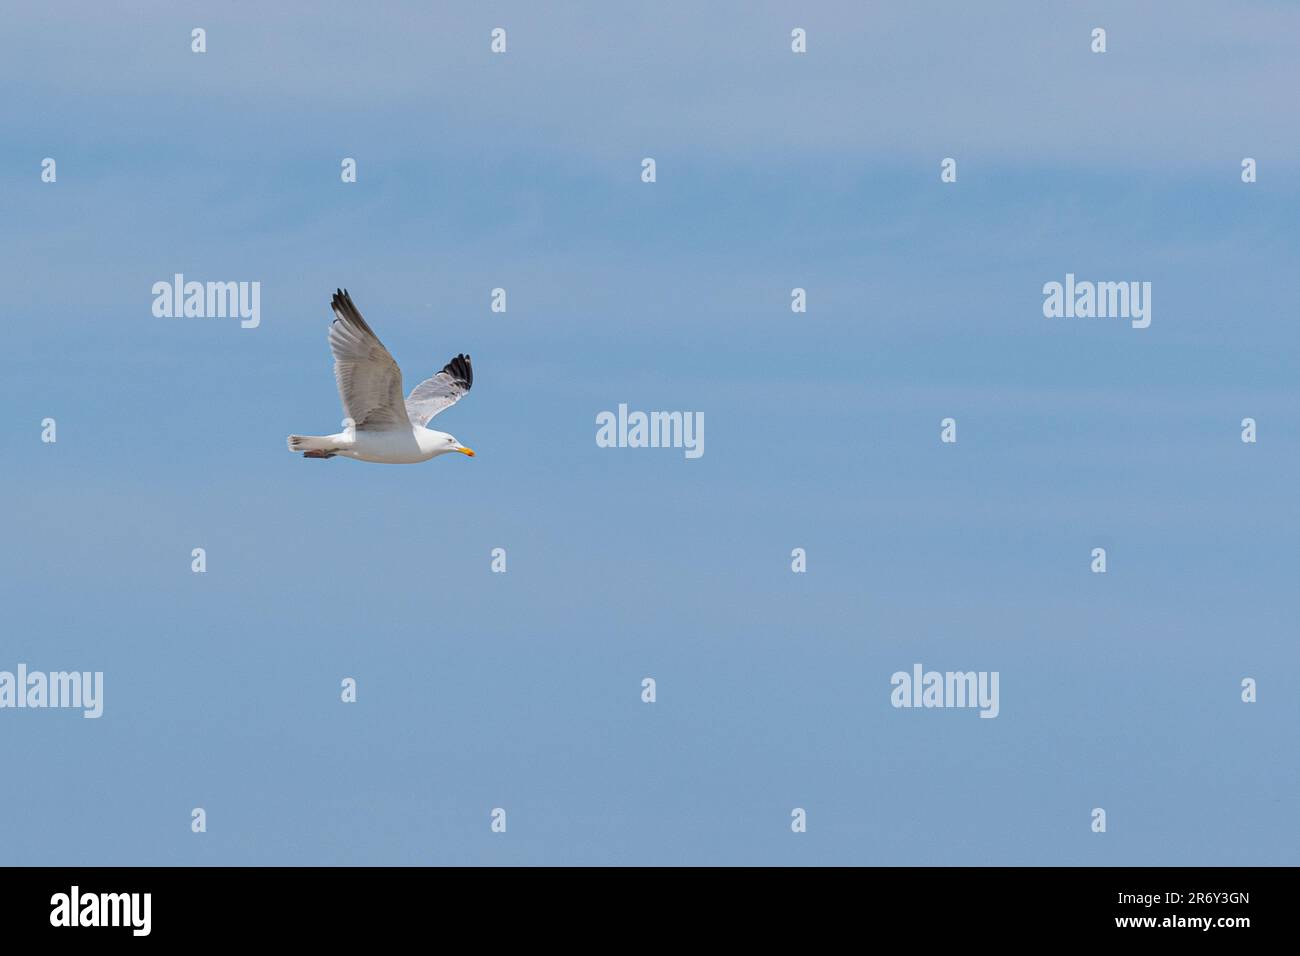 By the sea, there are many seagulls flying around. Stock Photo